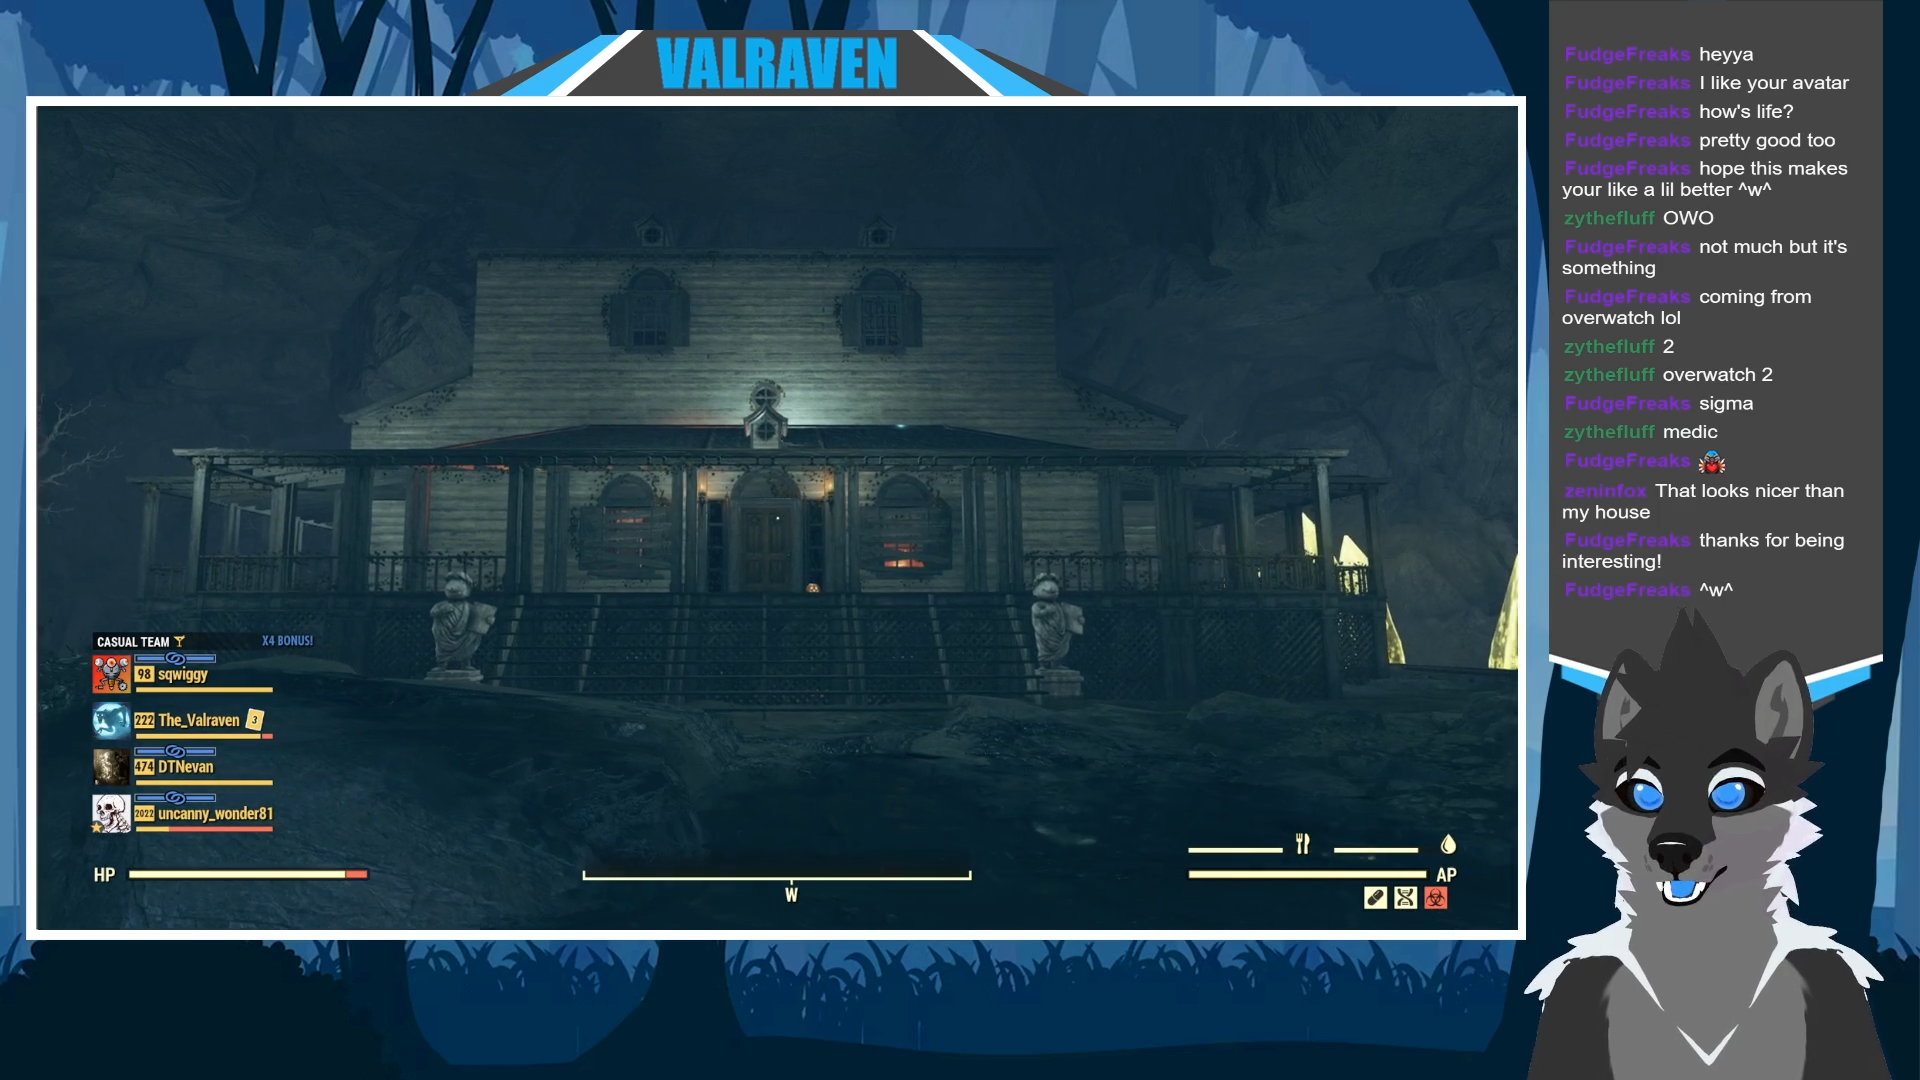 Valraven plays Fallout 76 - Streamed by The_Valraven